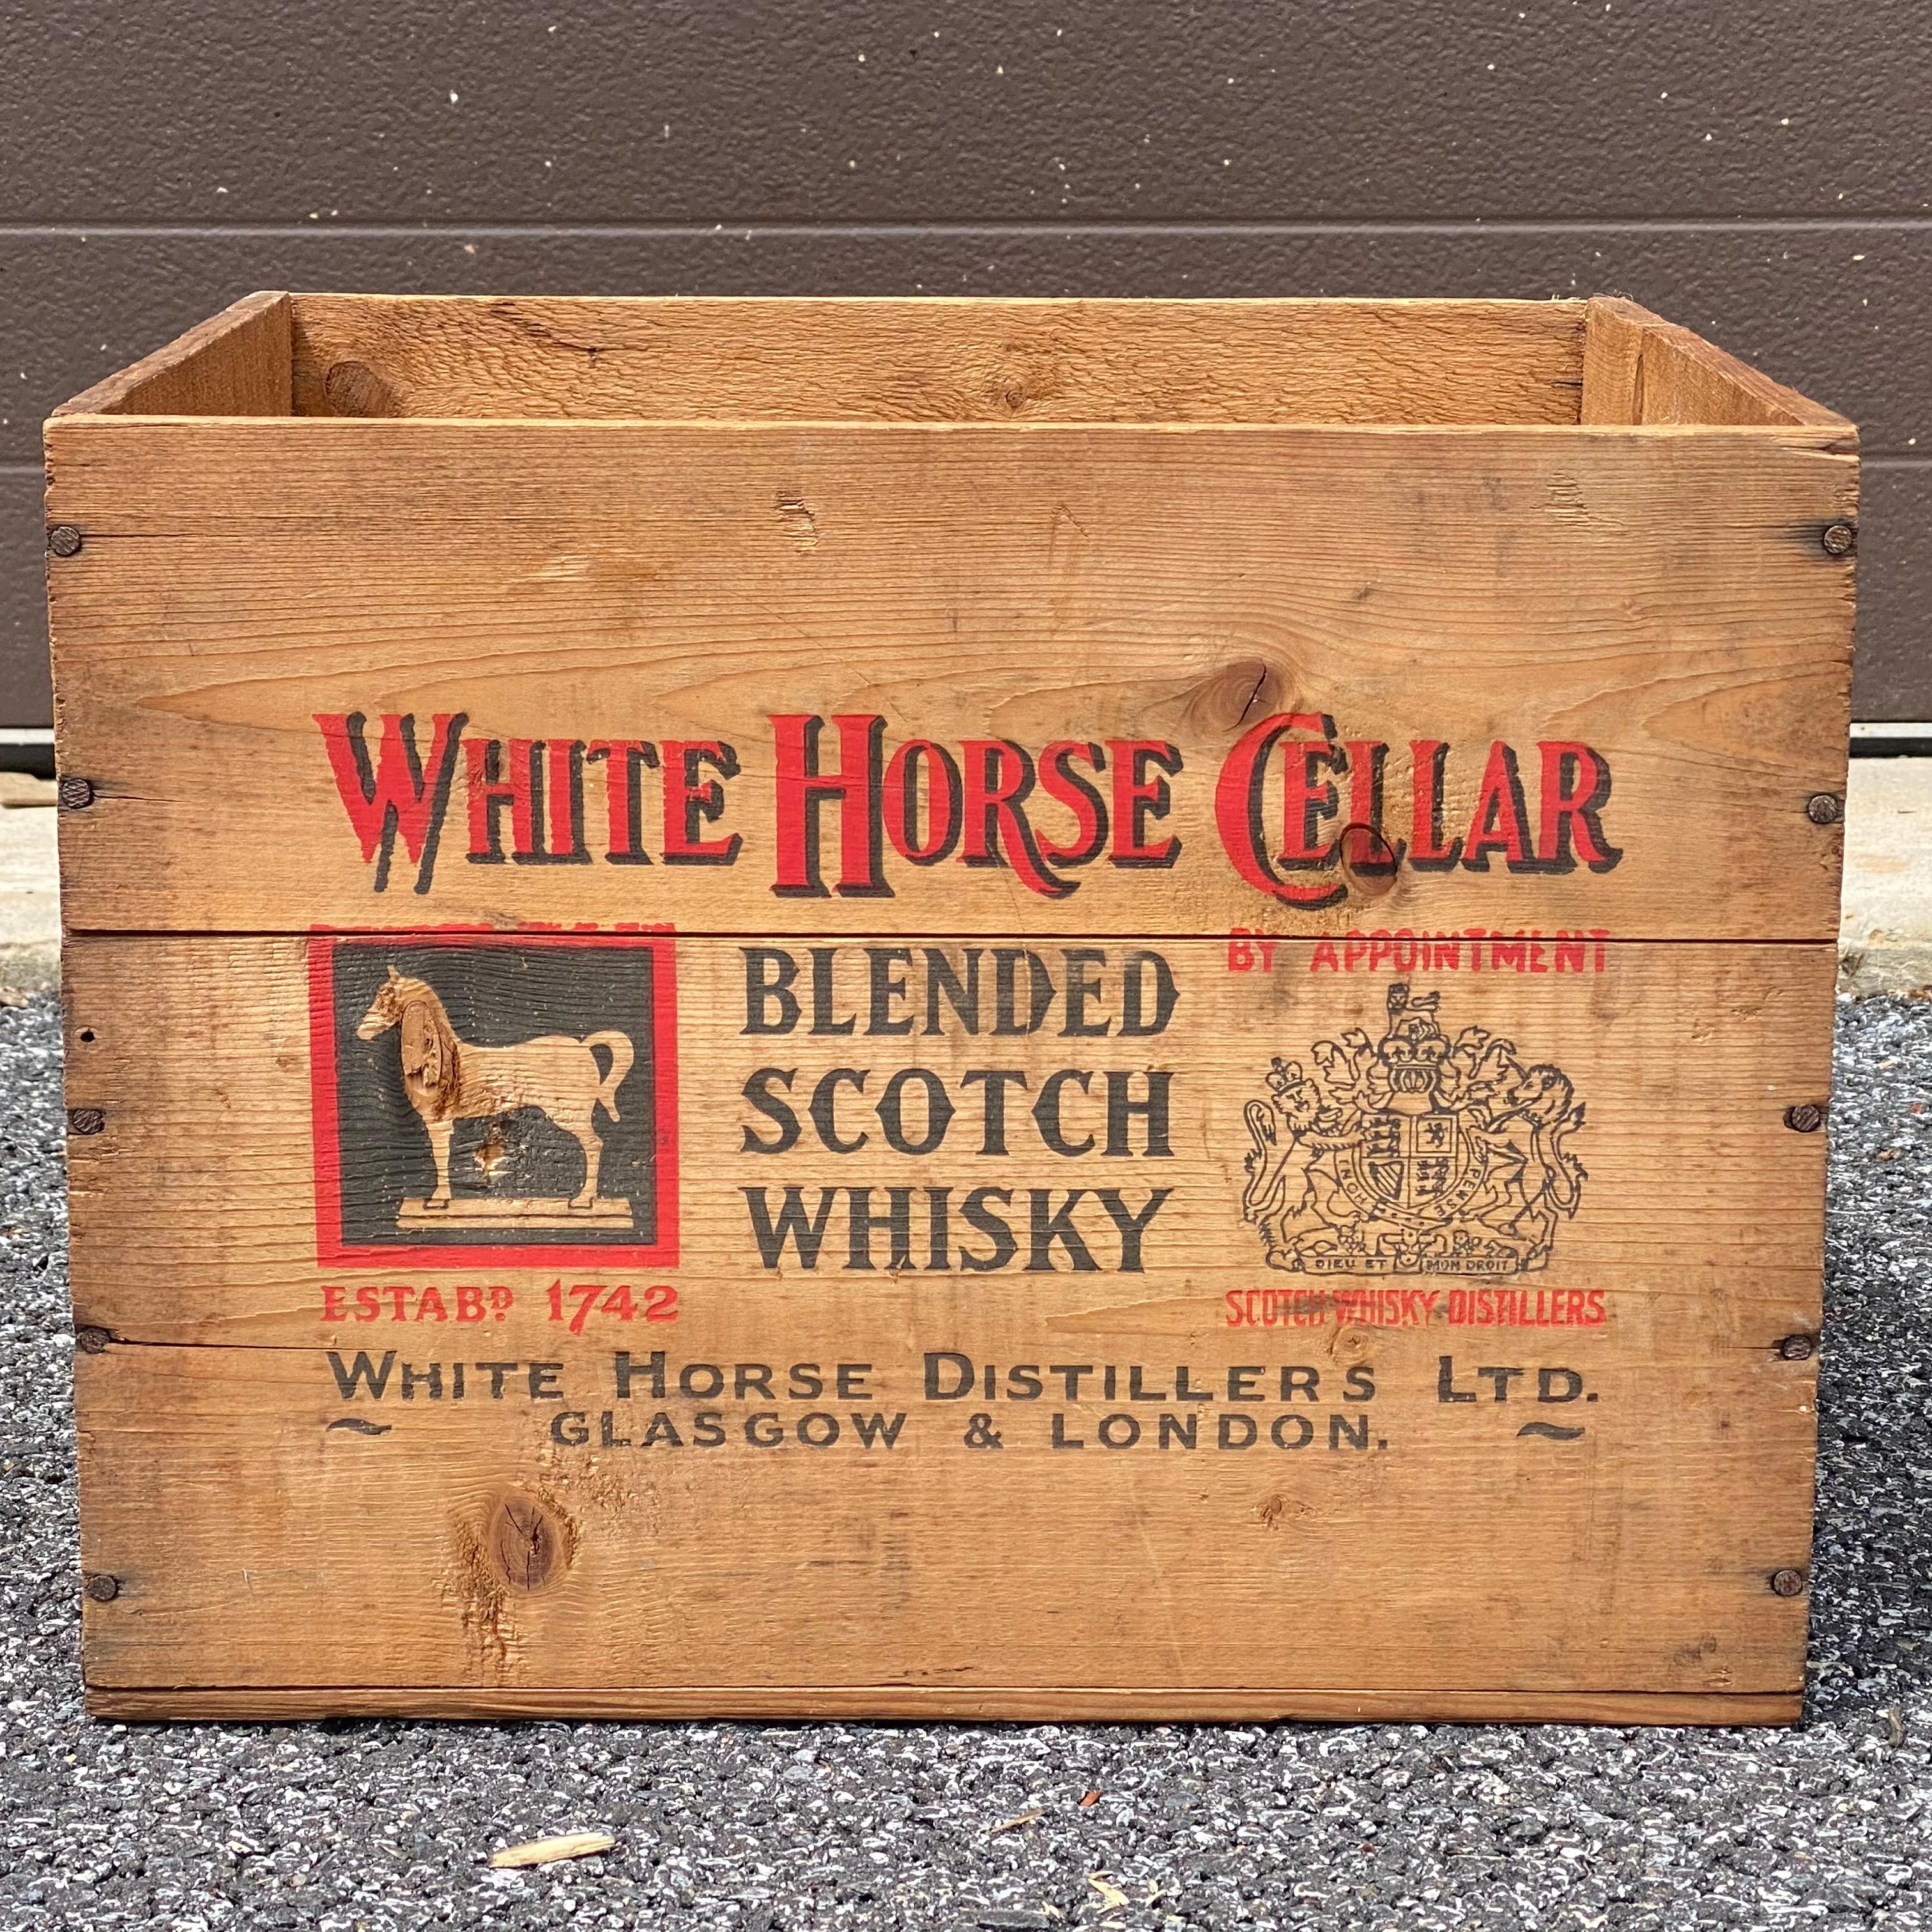 A nice vintage White Horse Cellar Scotch Whiskey wooden crate circa 1956

Interior dimensions roughly
14”x12.25”x 11”h